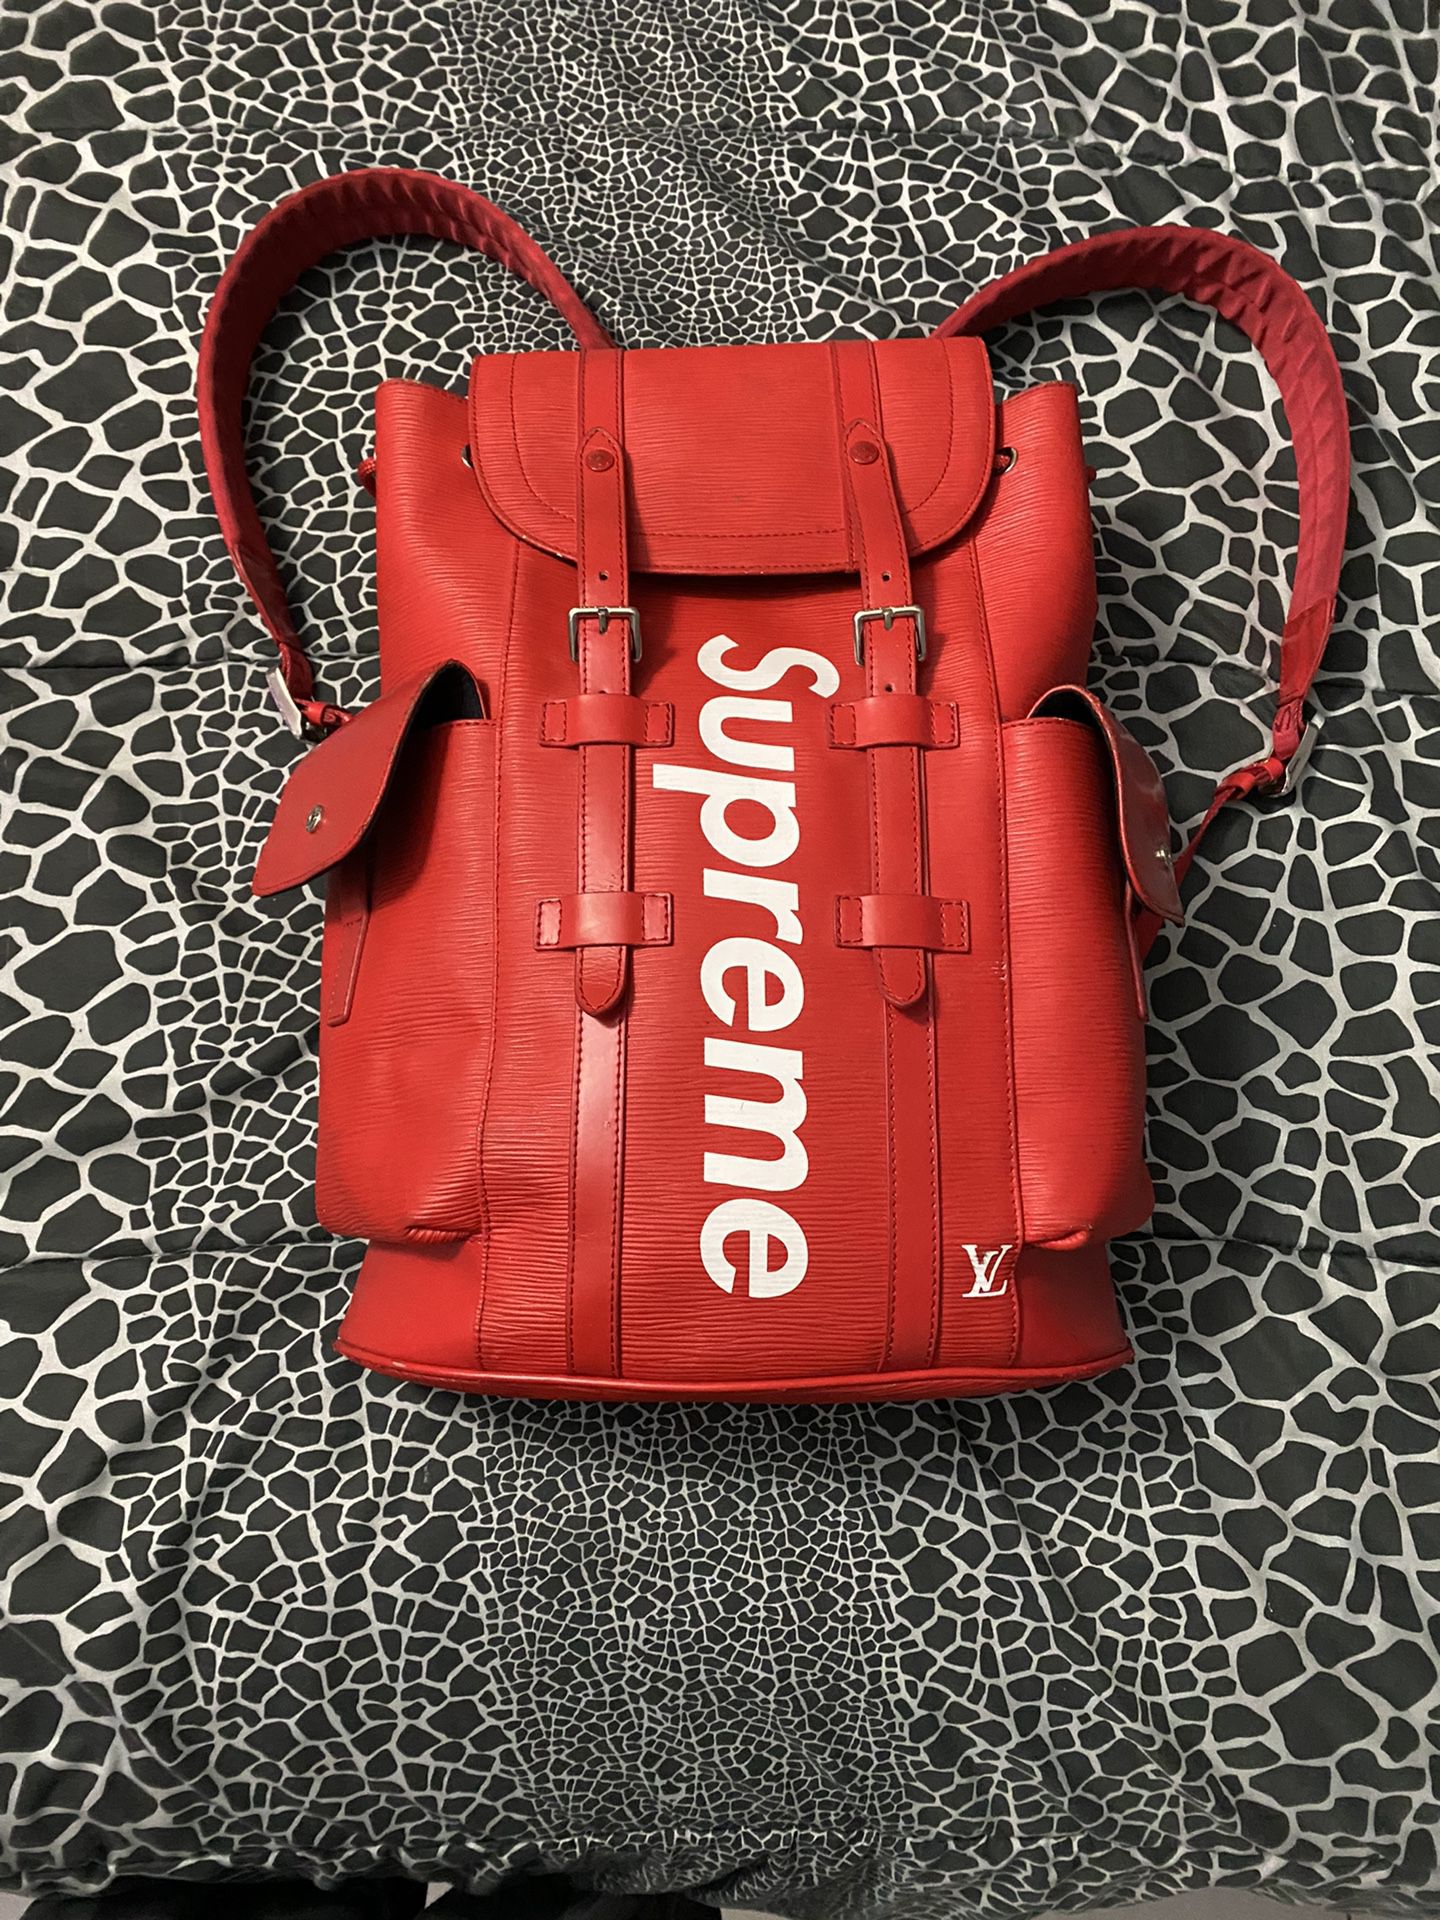 Supreme x Luis Vuitton Backpack -Authentic